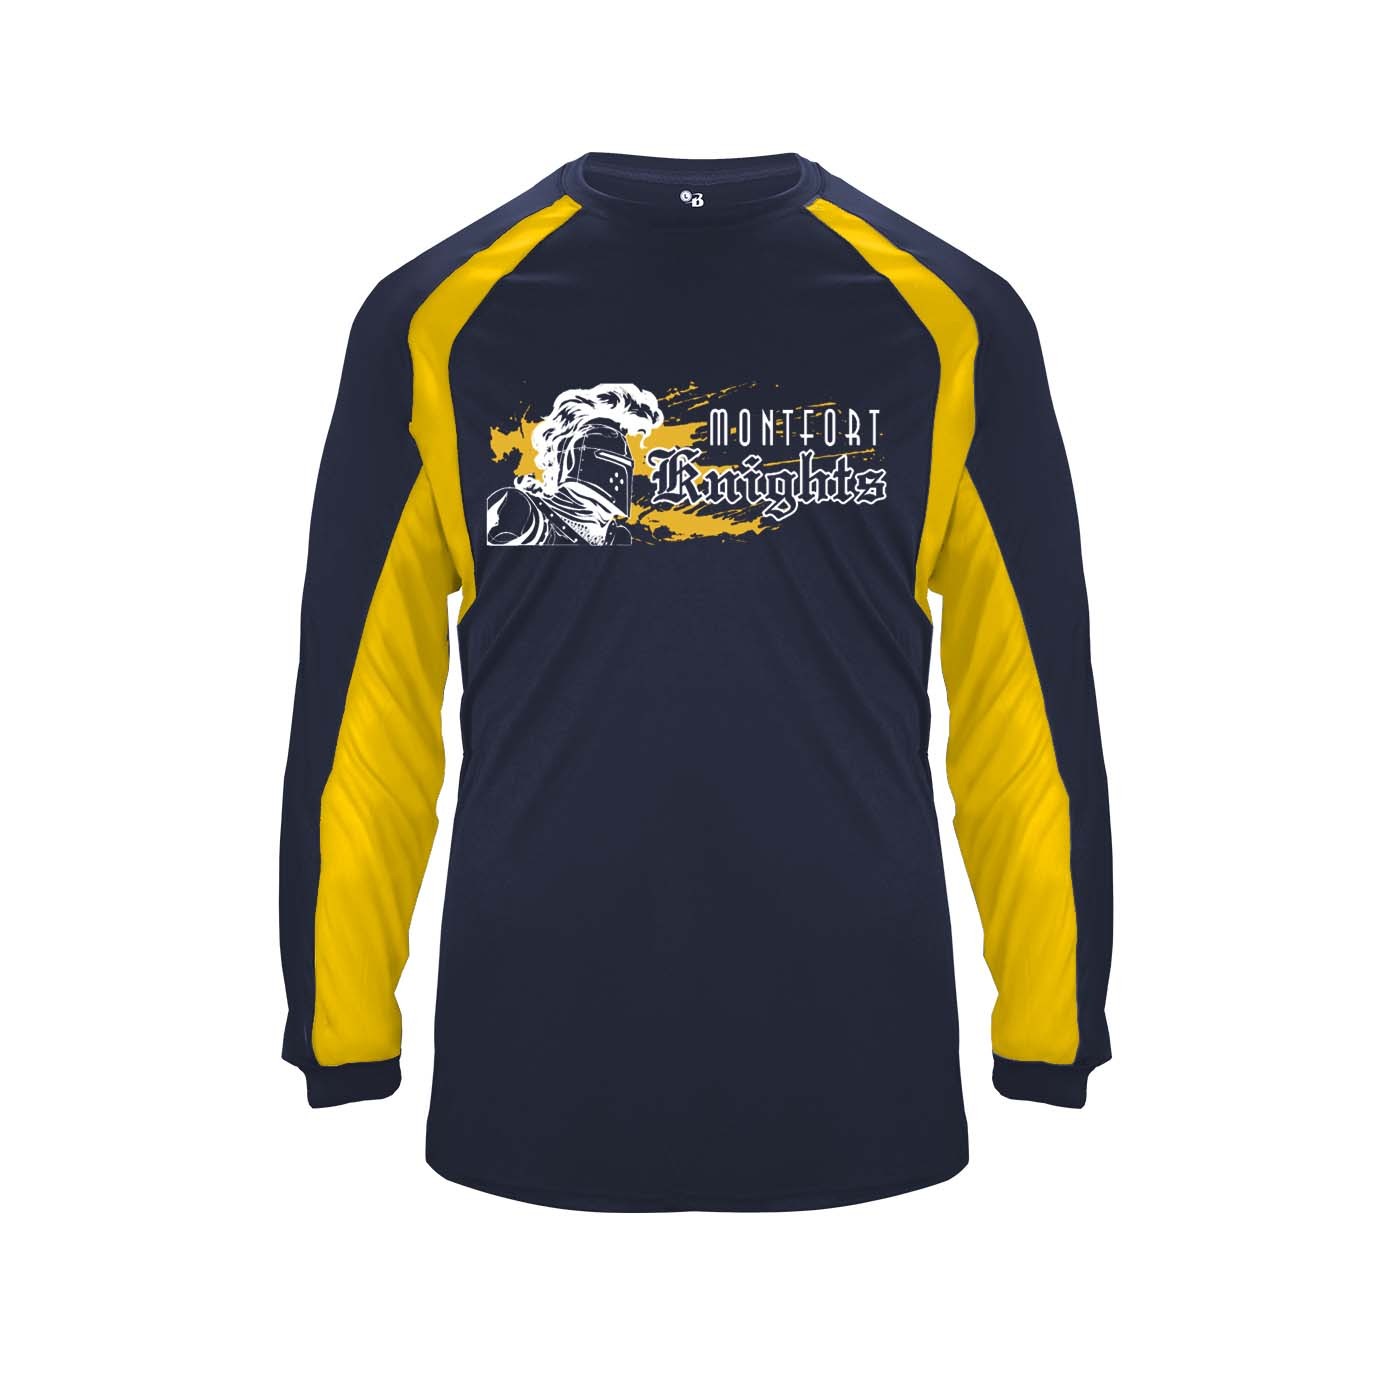 MONTFORT Spirit Hook L/S T-Shirt w/ White Knight Logo - Please Allow 2-3 Weeks for Delivery